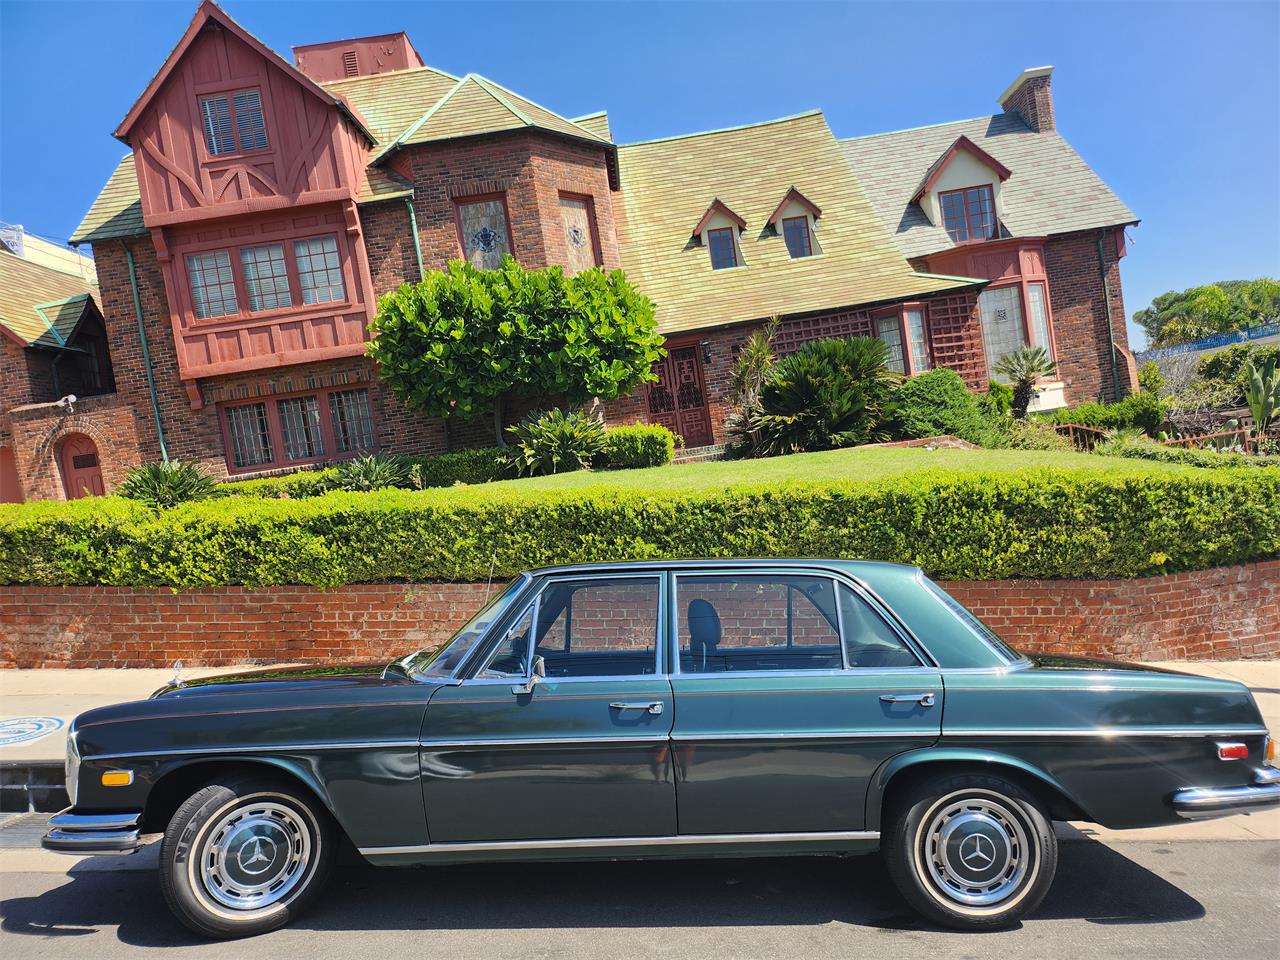 For Sale: 1973 Mercedes-Benz 280SEL in Los Angeles, California for sale in Los Angeles, CA